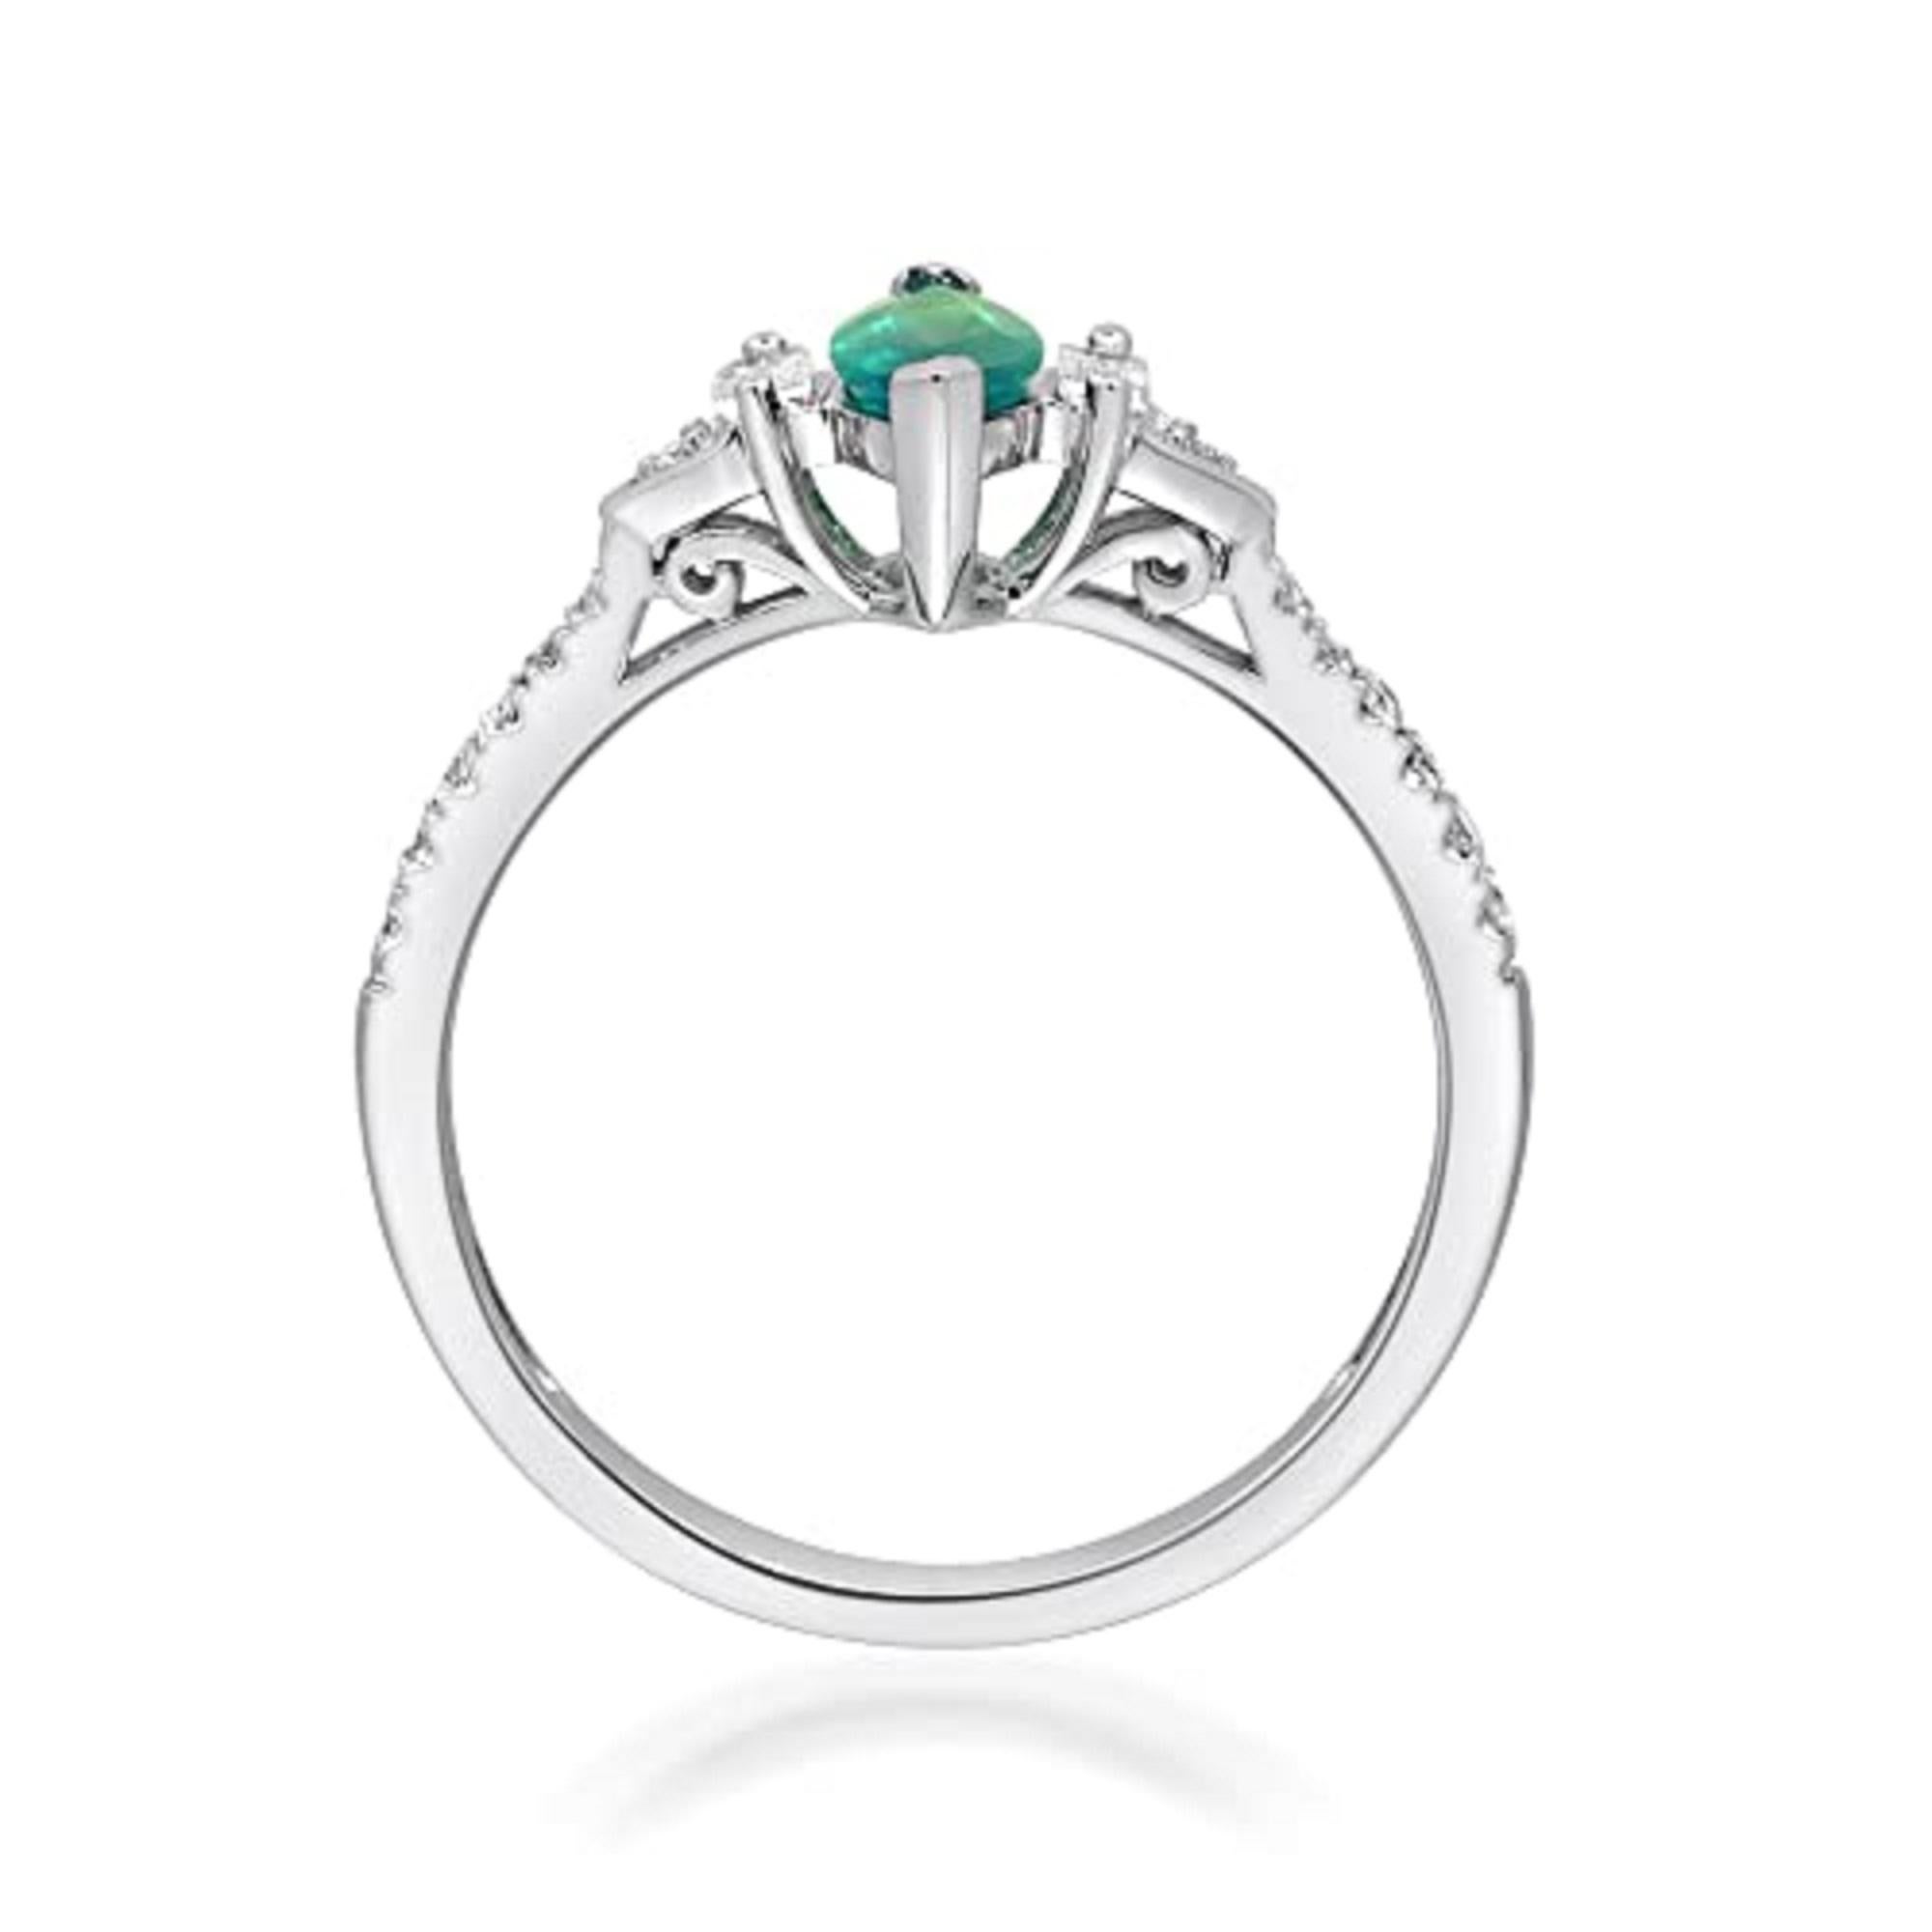 Decorate yourself in elegance with this Ring is crafted from 10-karat White Gold by Gin & Grace. This Ring is made up of 8x4 mm Marquise-Cut Emerald (1 pcs) 0.53 carat and Round-cut White Diamond (14 Pcs) 0.11 Carat, Baguette-cut White Diamond (2